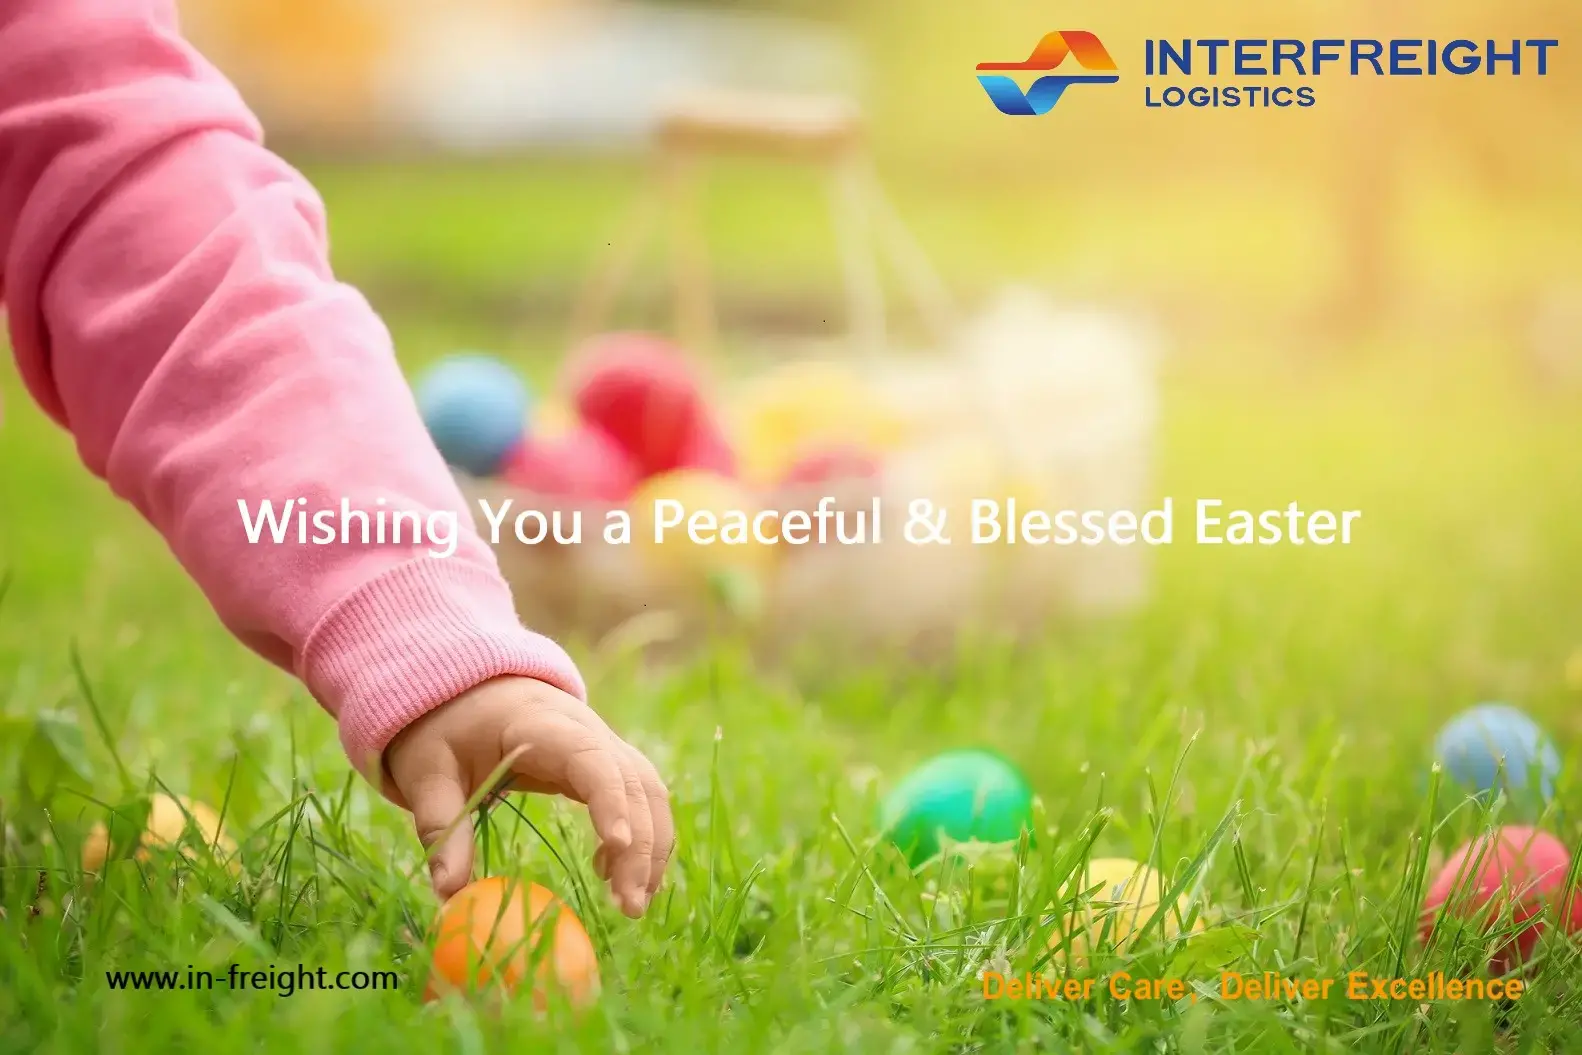 Wishing You a Peaceful & Blessed Easter.